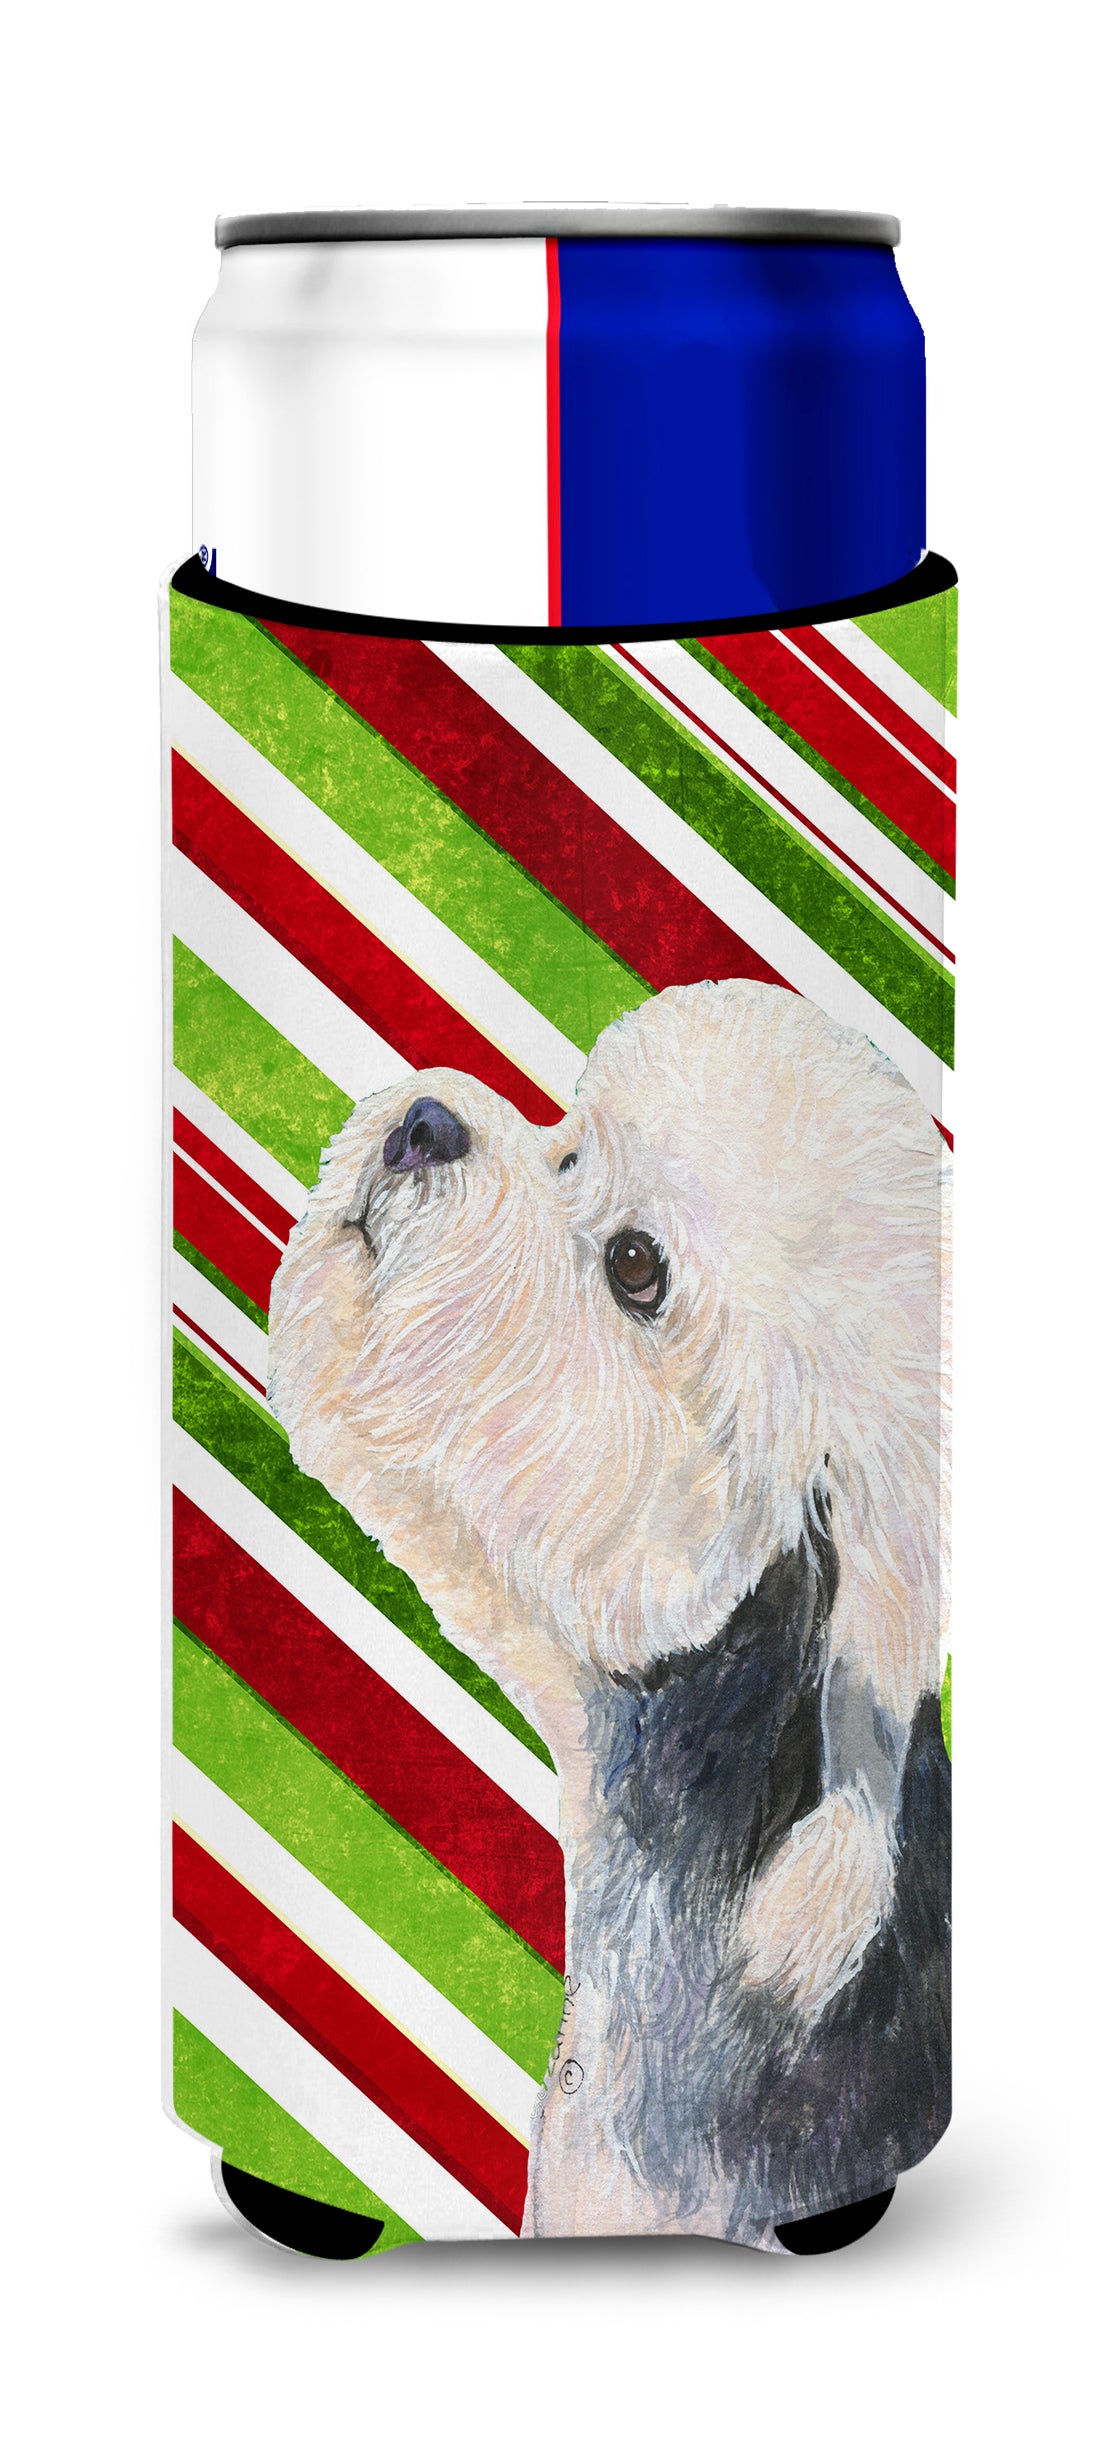 Dandie Dinmont Terrier Candy Cane Holiday Christmas Ultra Beverage Insulators for slim cans SS4572MUK.